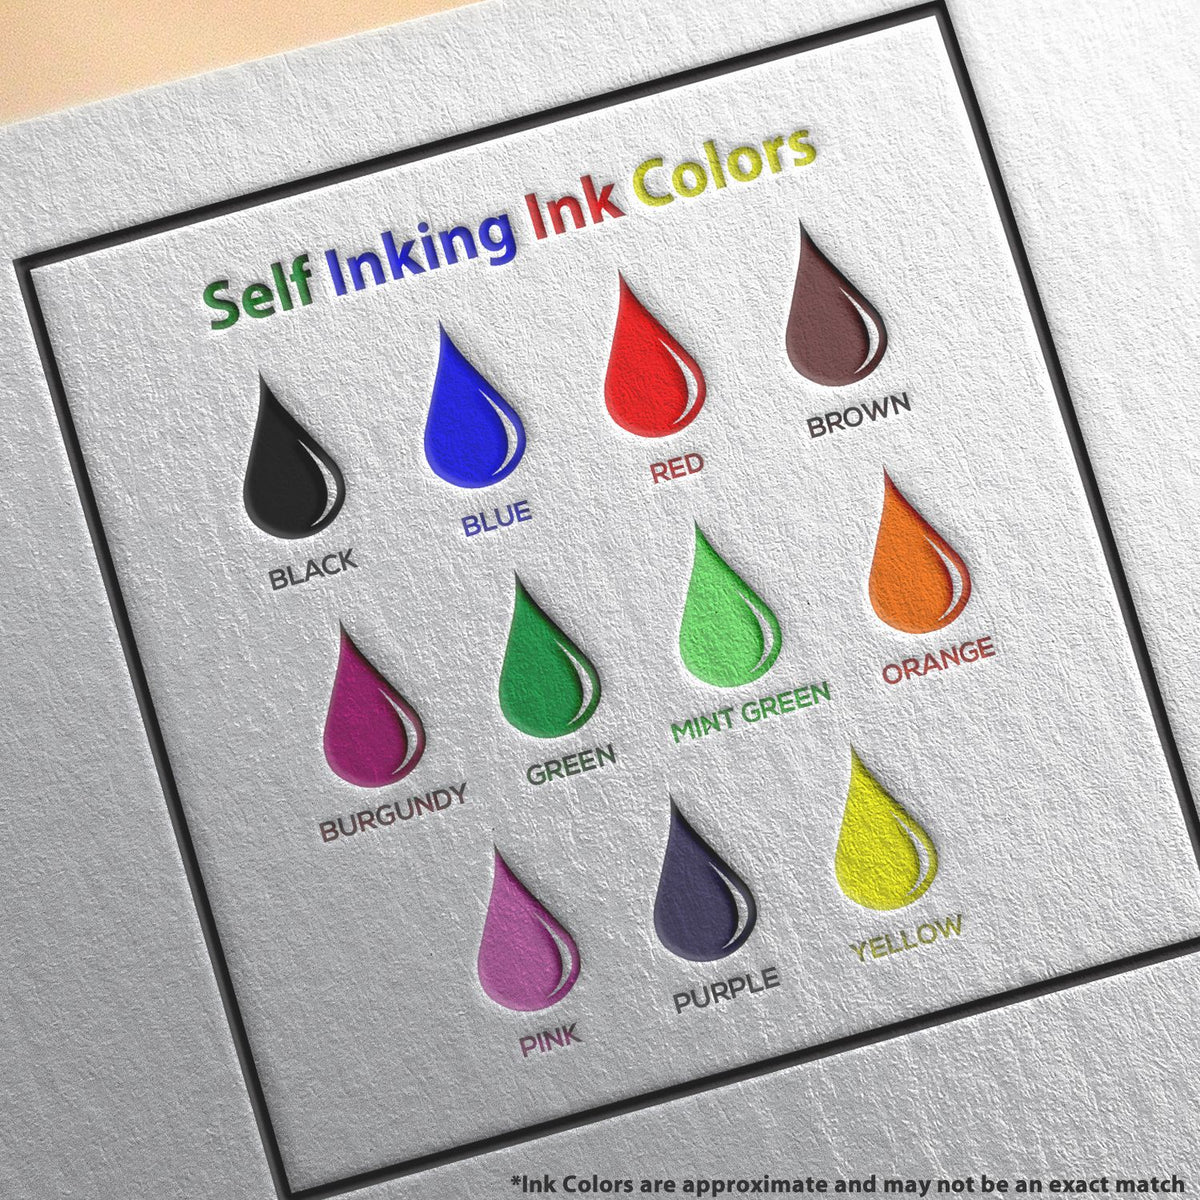 A picture showing the different ink colors or hues available for the Heavy-Duty South Carolina Rectangular Notary Stamp product.